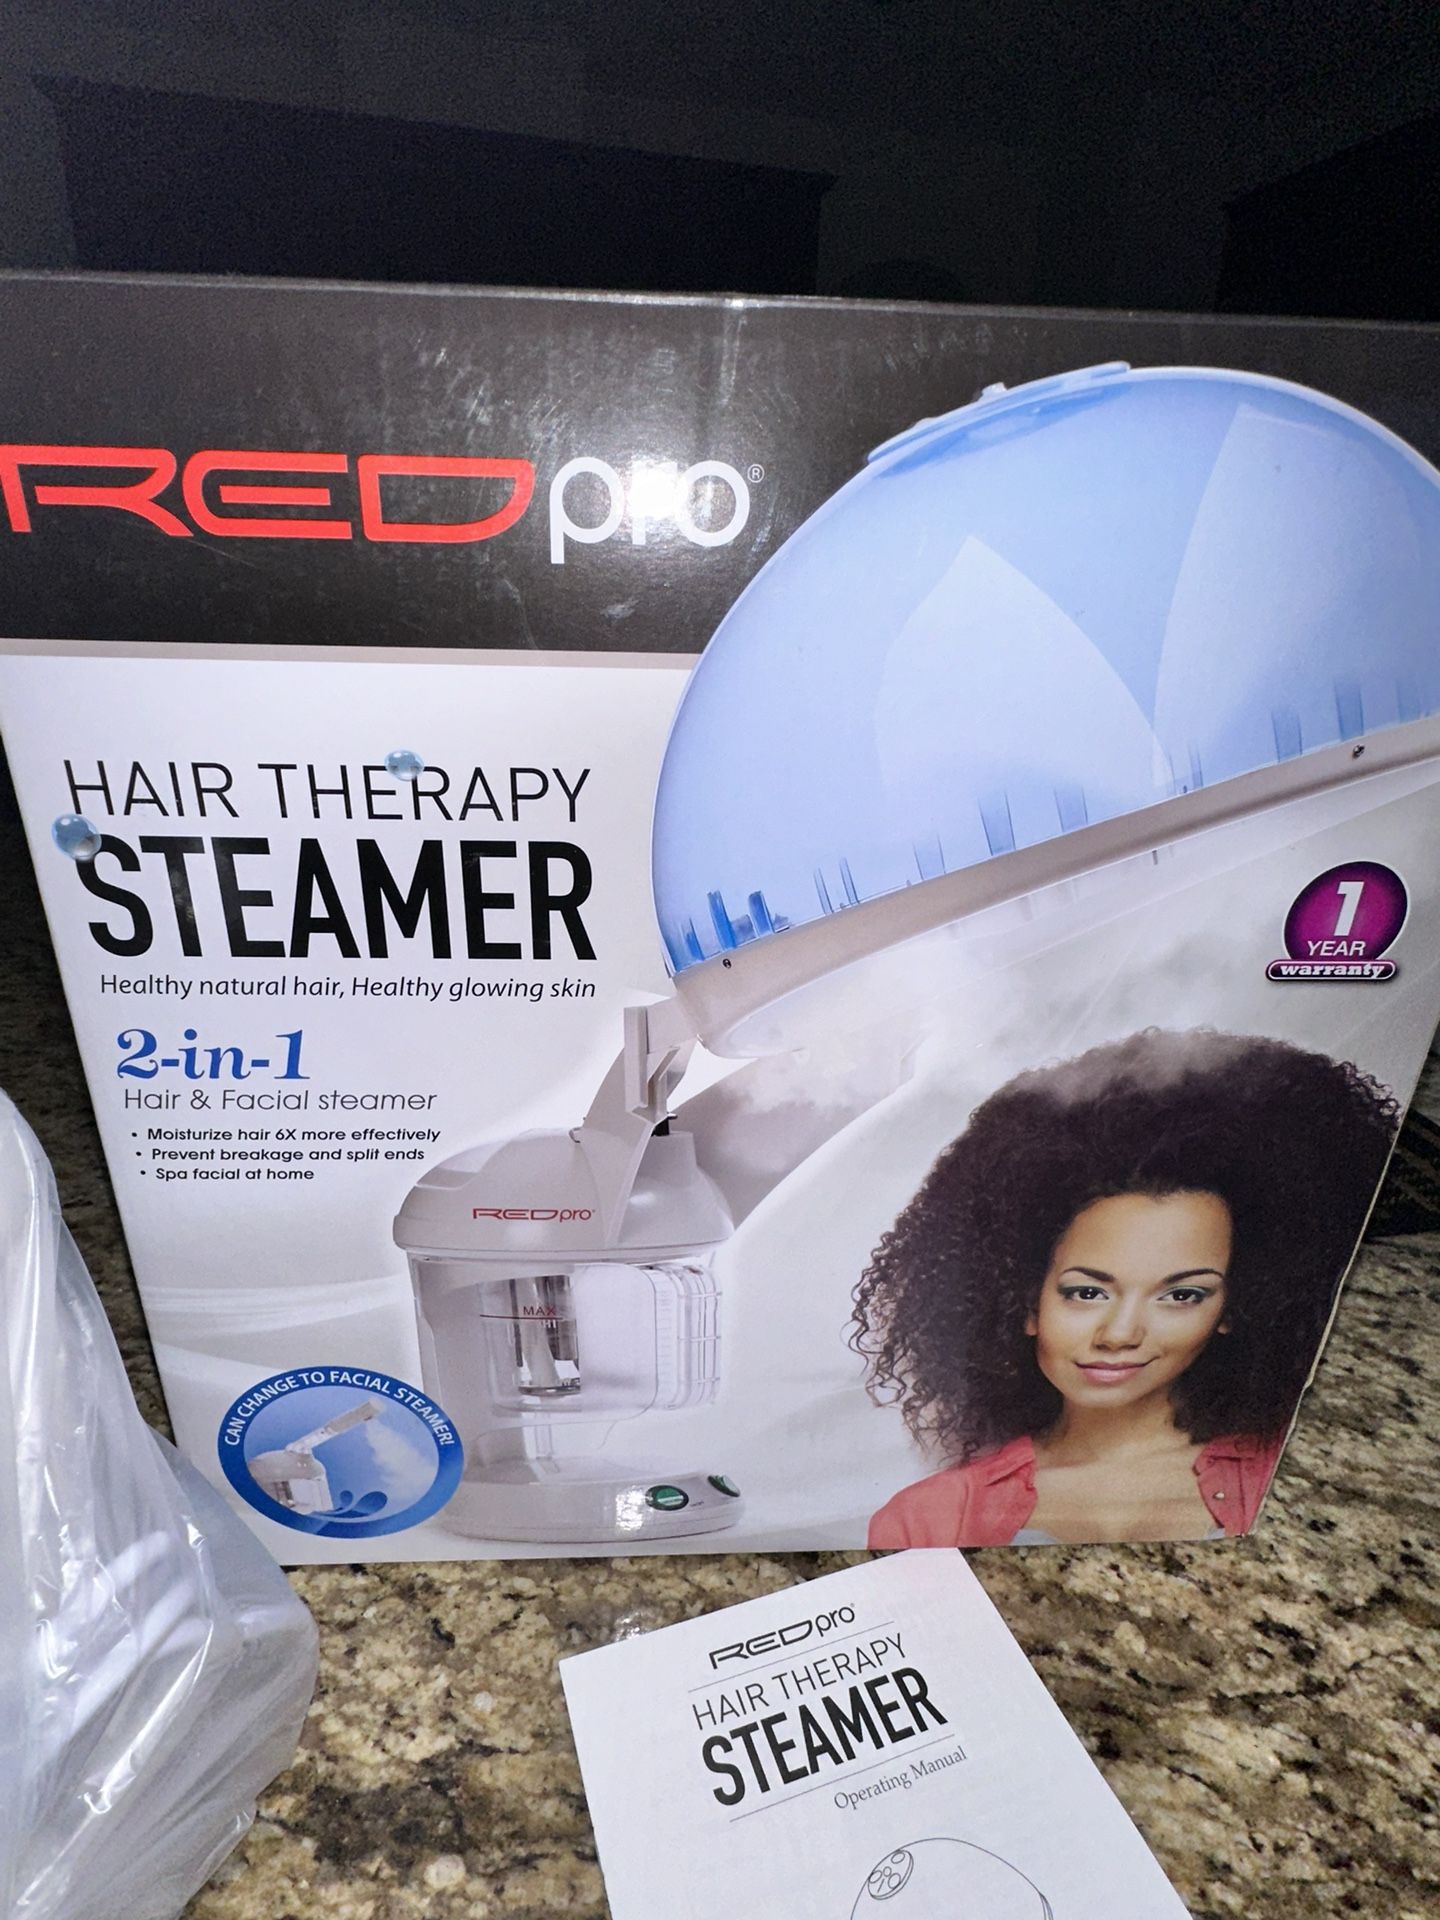 New 2 in 1 Hair Therapy & Facial Steamer - All Hair Types - Men & Women